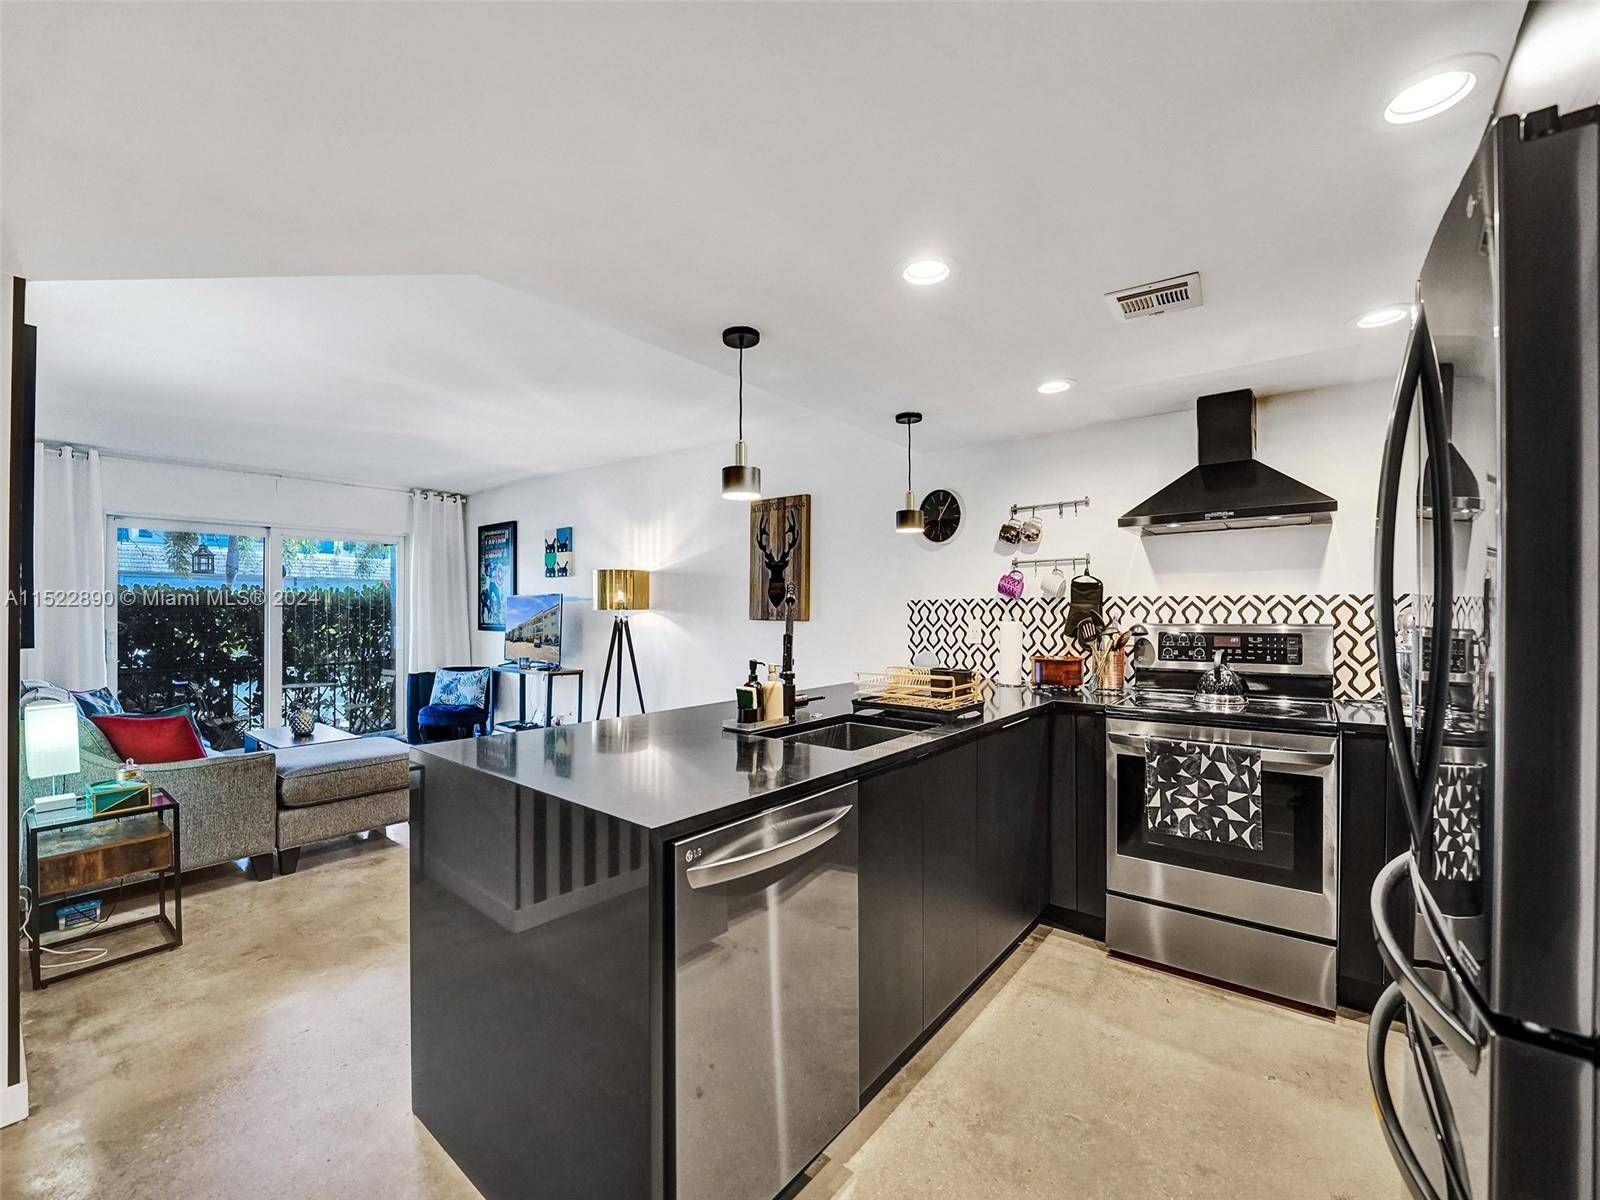 COMPLETELY RENOVATED in 2020 condo in the heart of Wilton Manors.